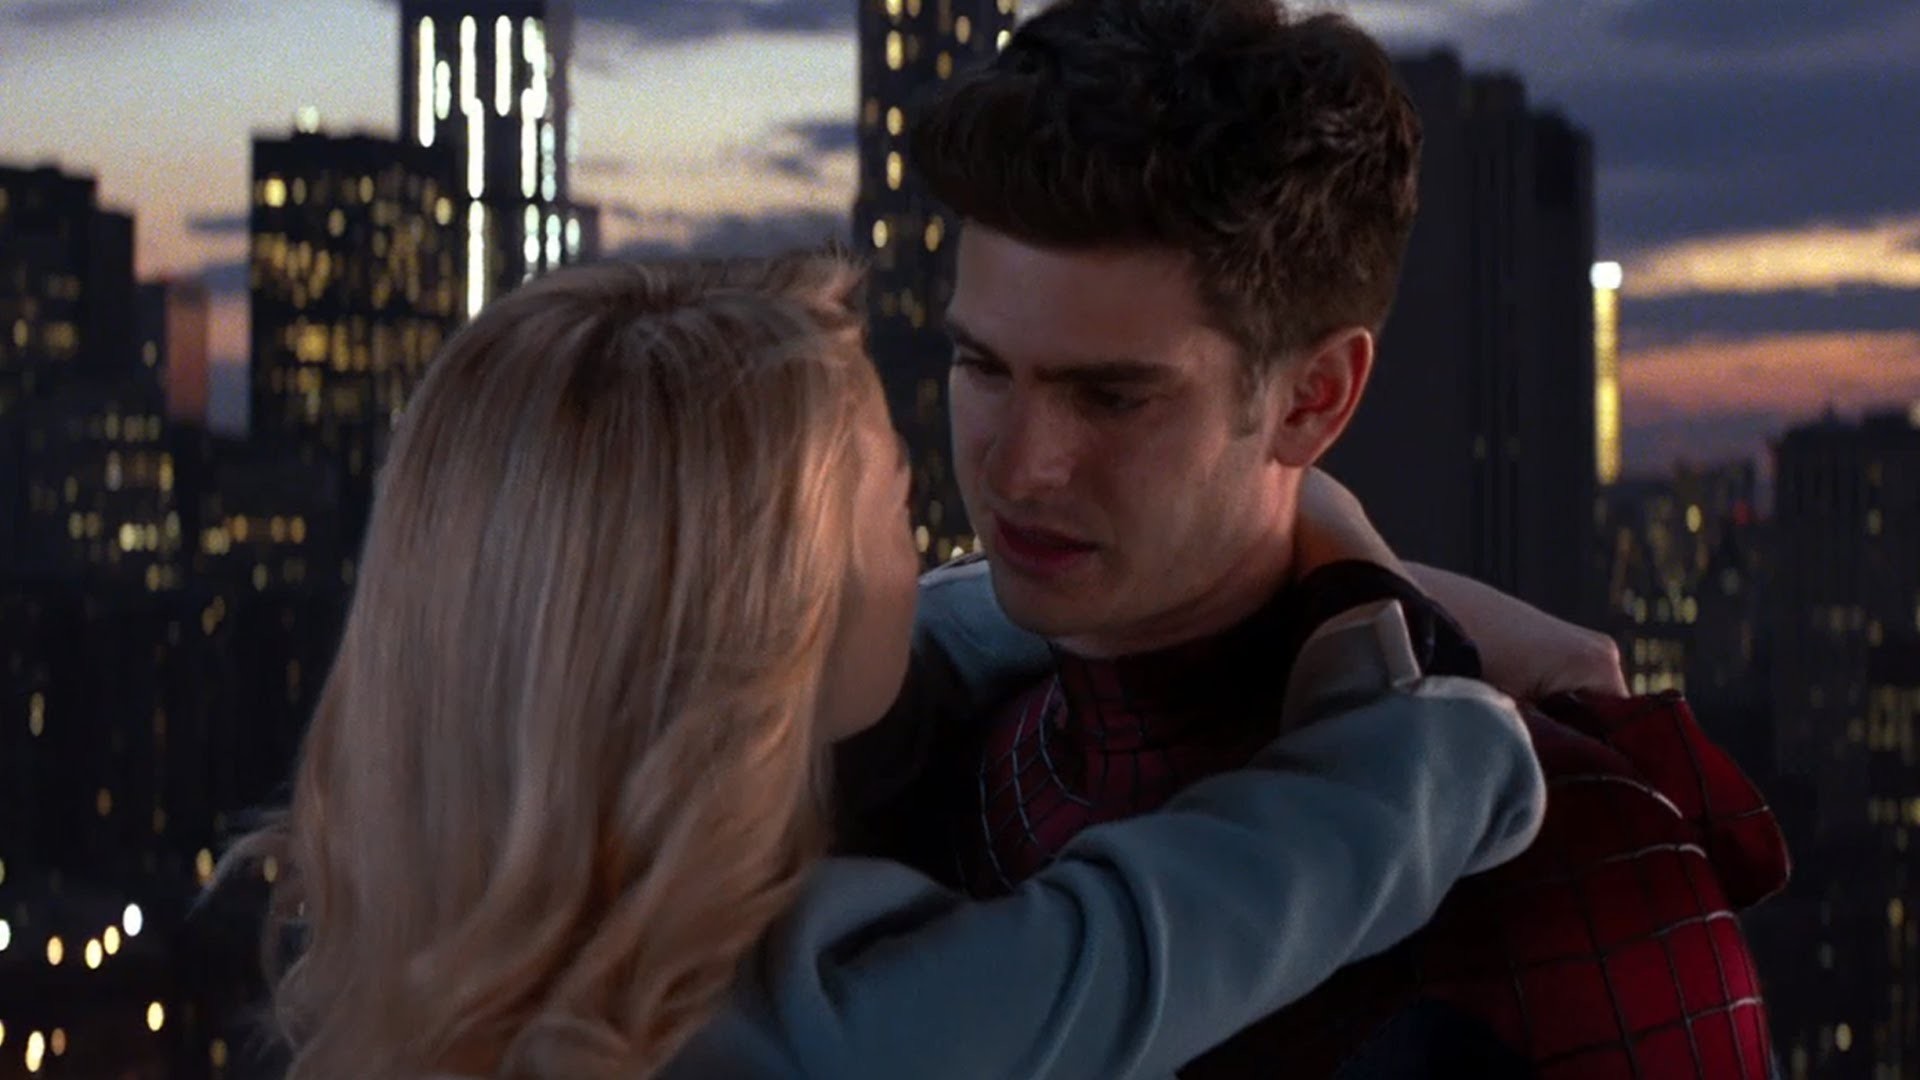 1920x1080 "The Amazing Spider-Man 2" Official Trailer - Does Gwen Stacey Die? -  YouTube